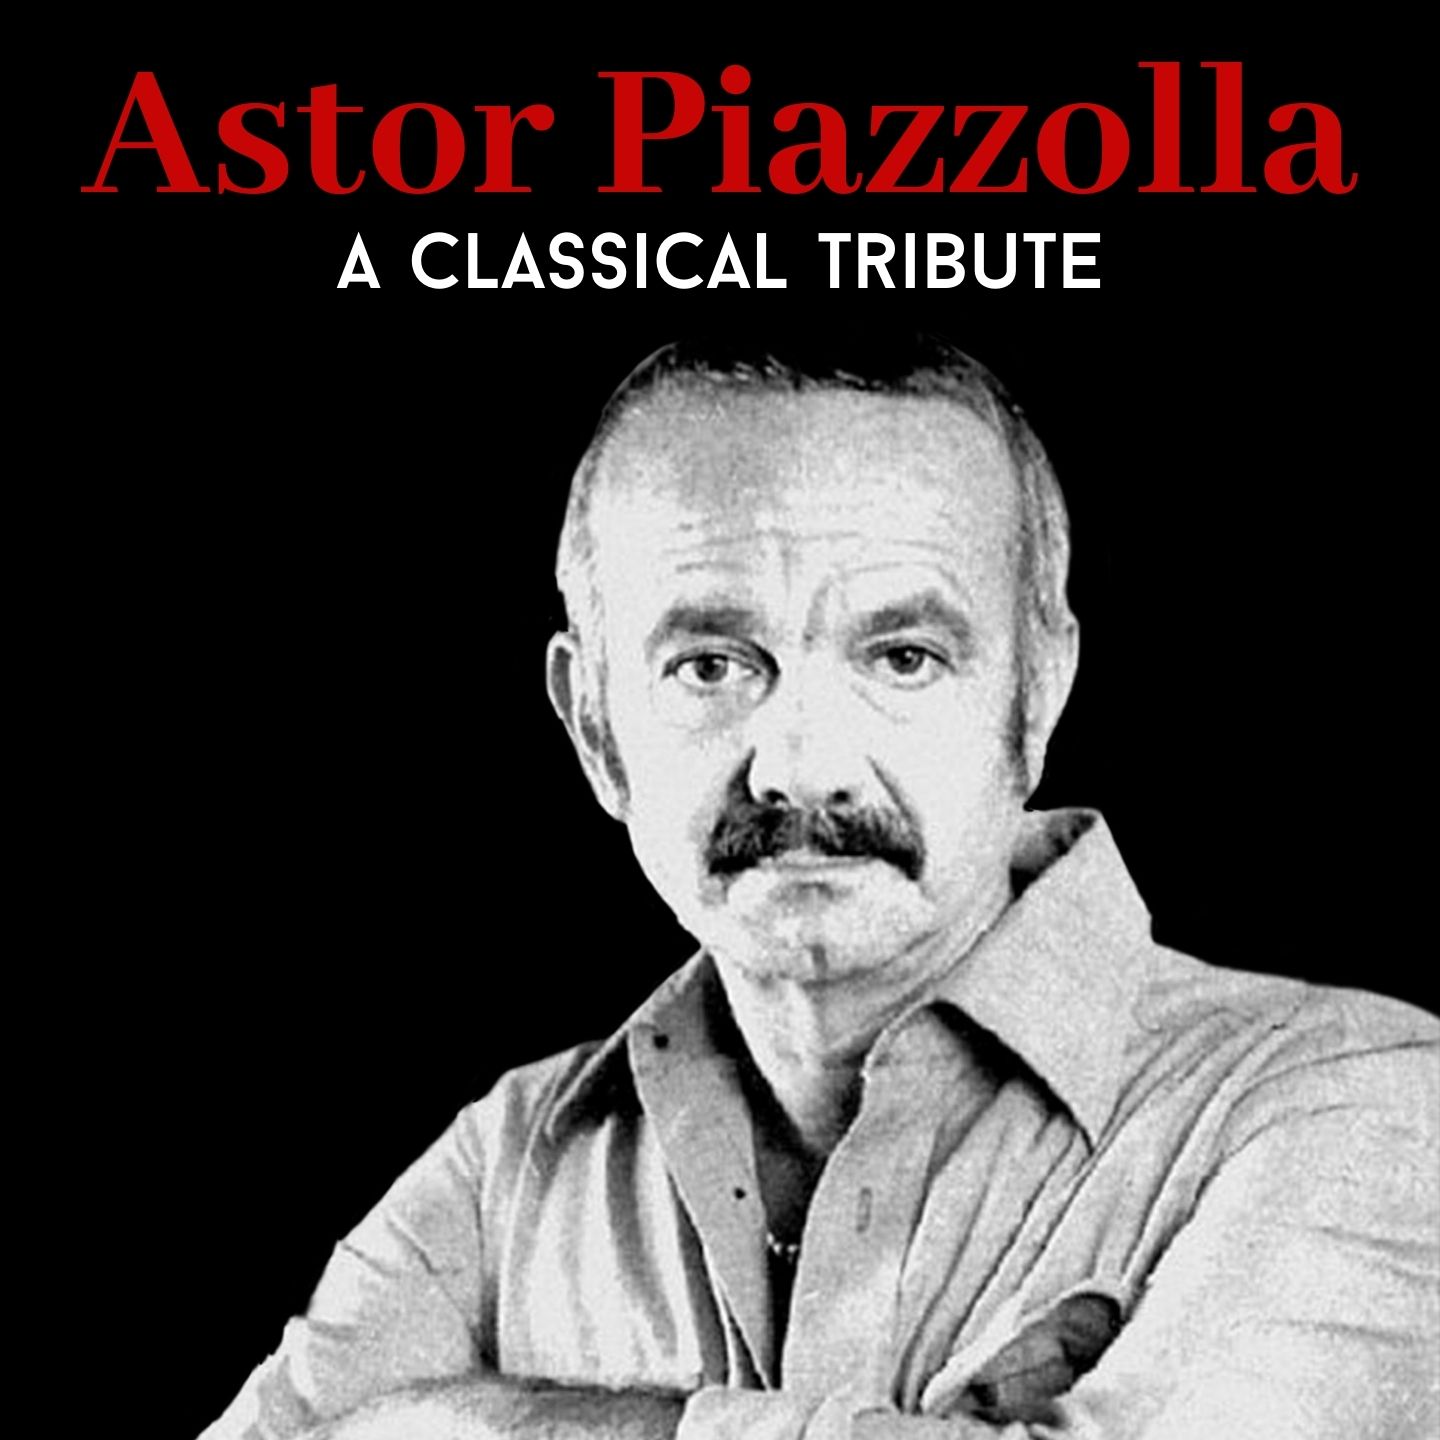 A Classical Tribute to Astor Piazzolla